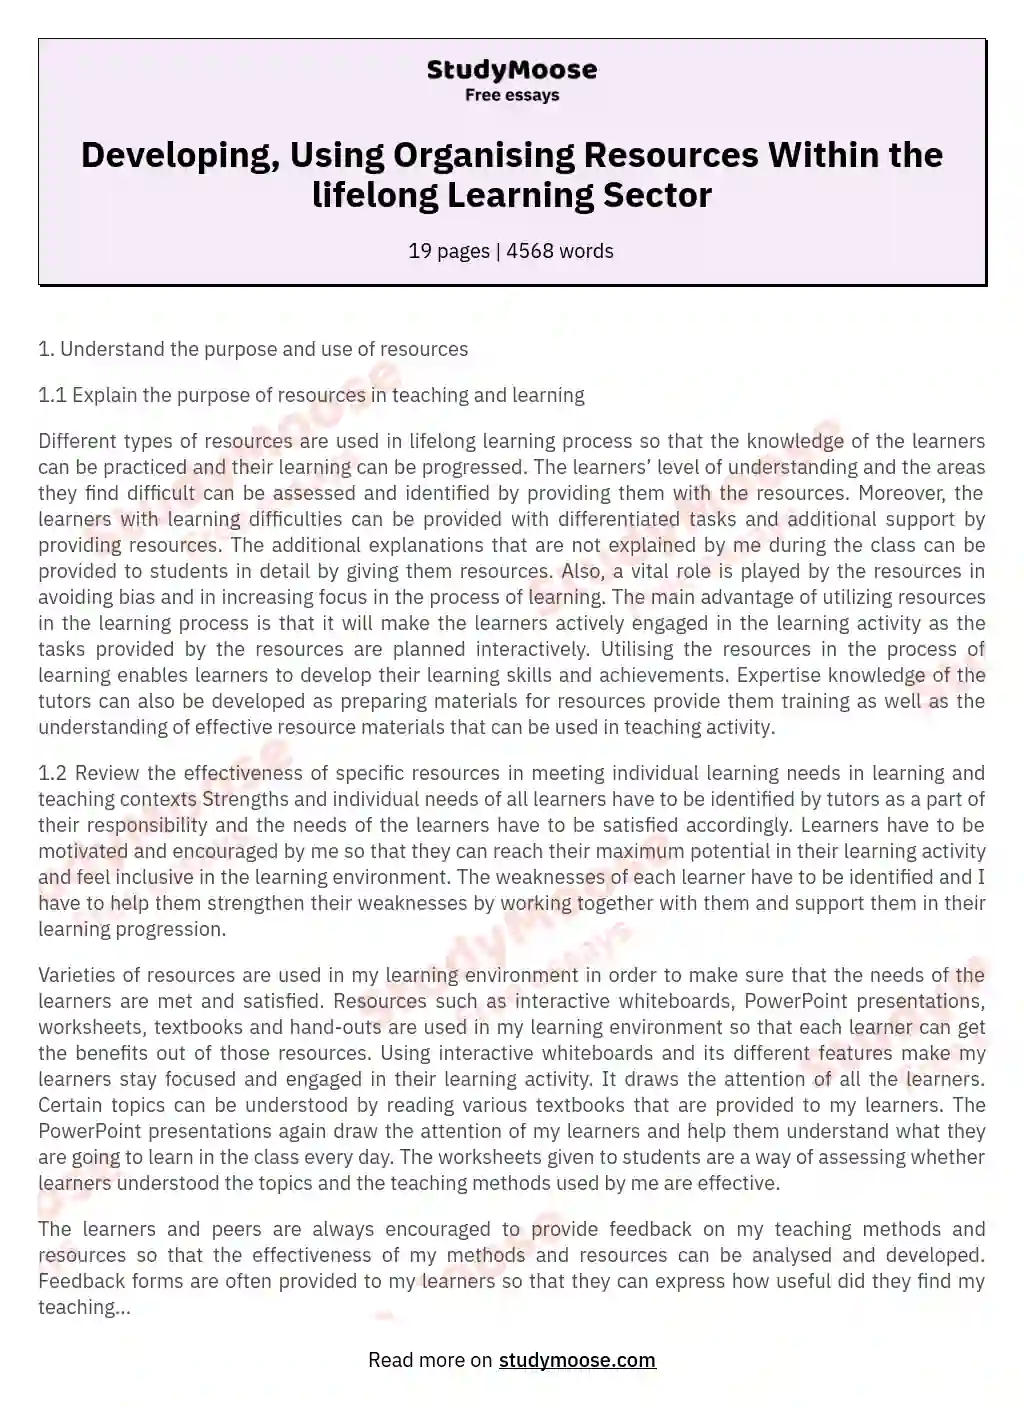 Developing, Using Organising Resources Within the lifelong Learning Sector essay